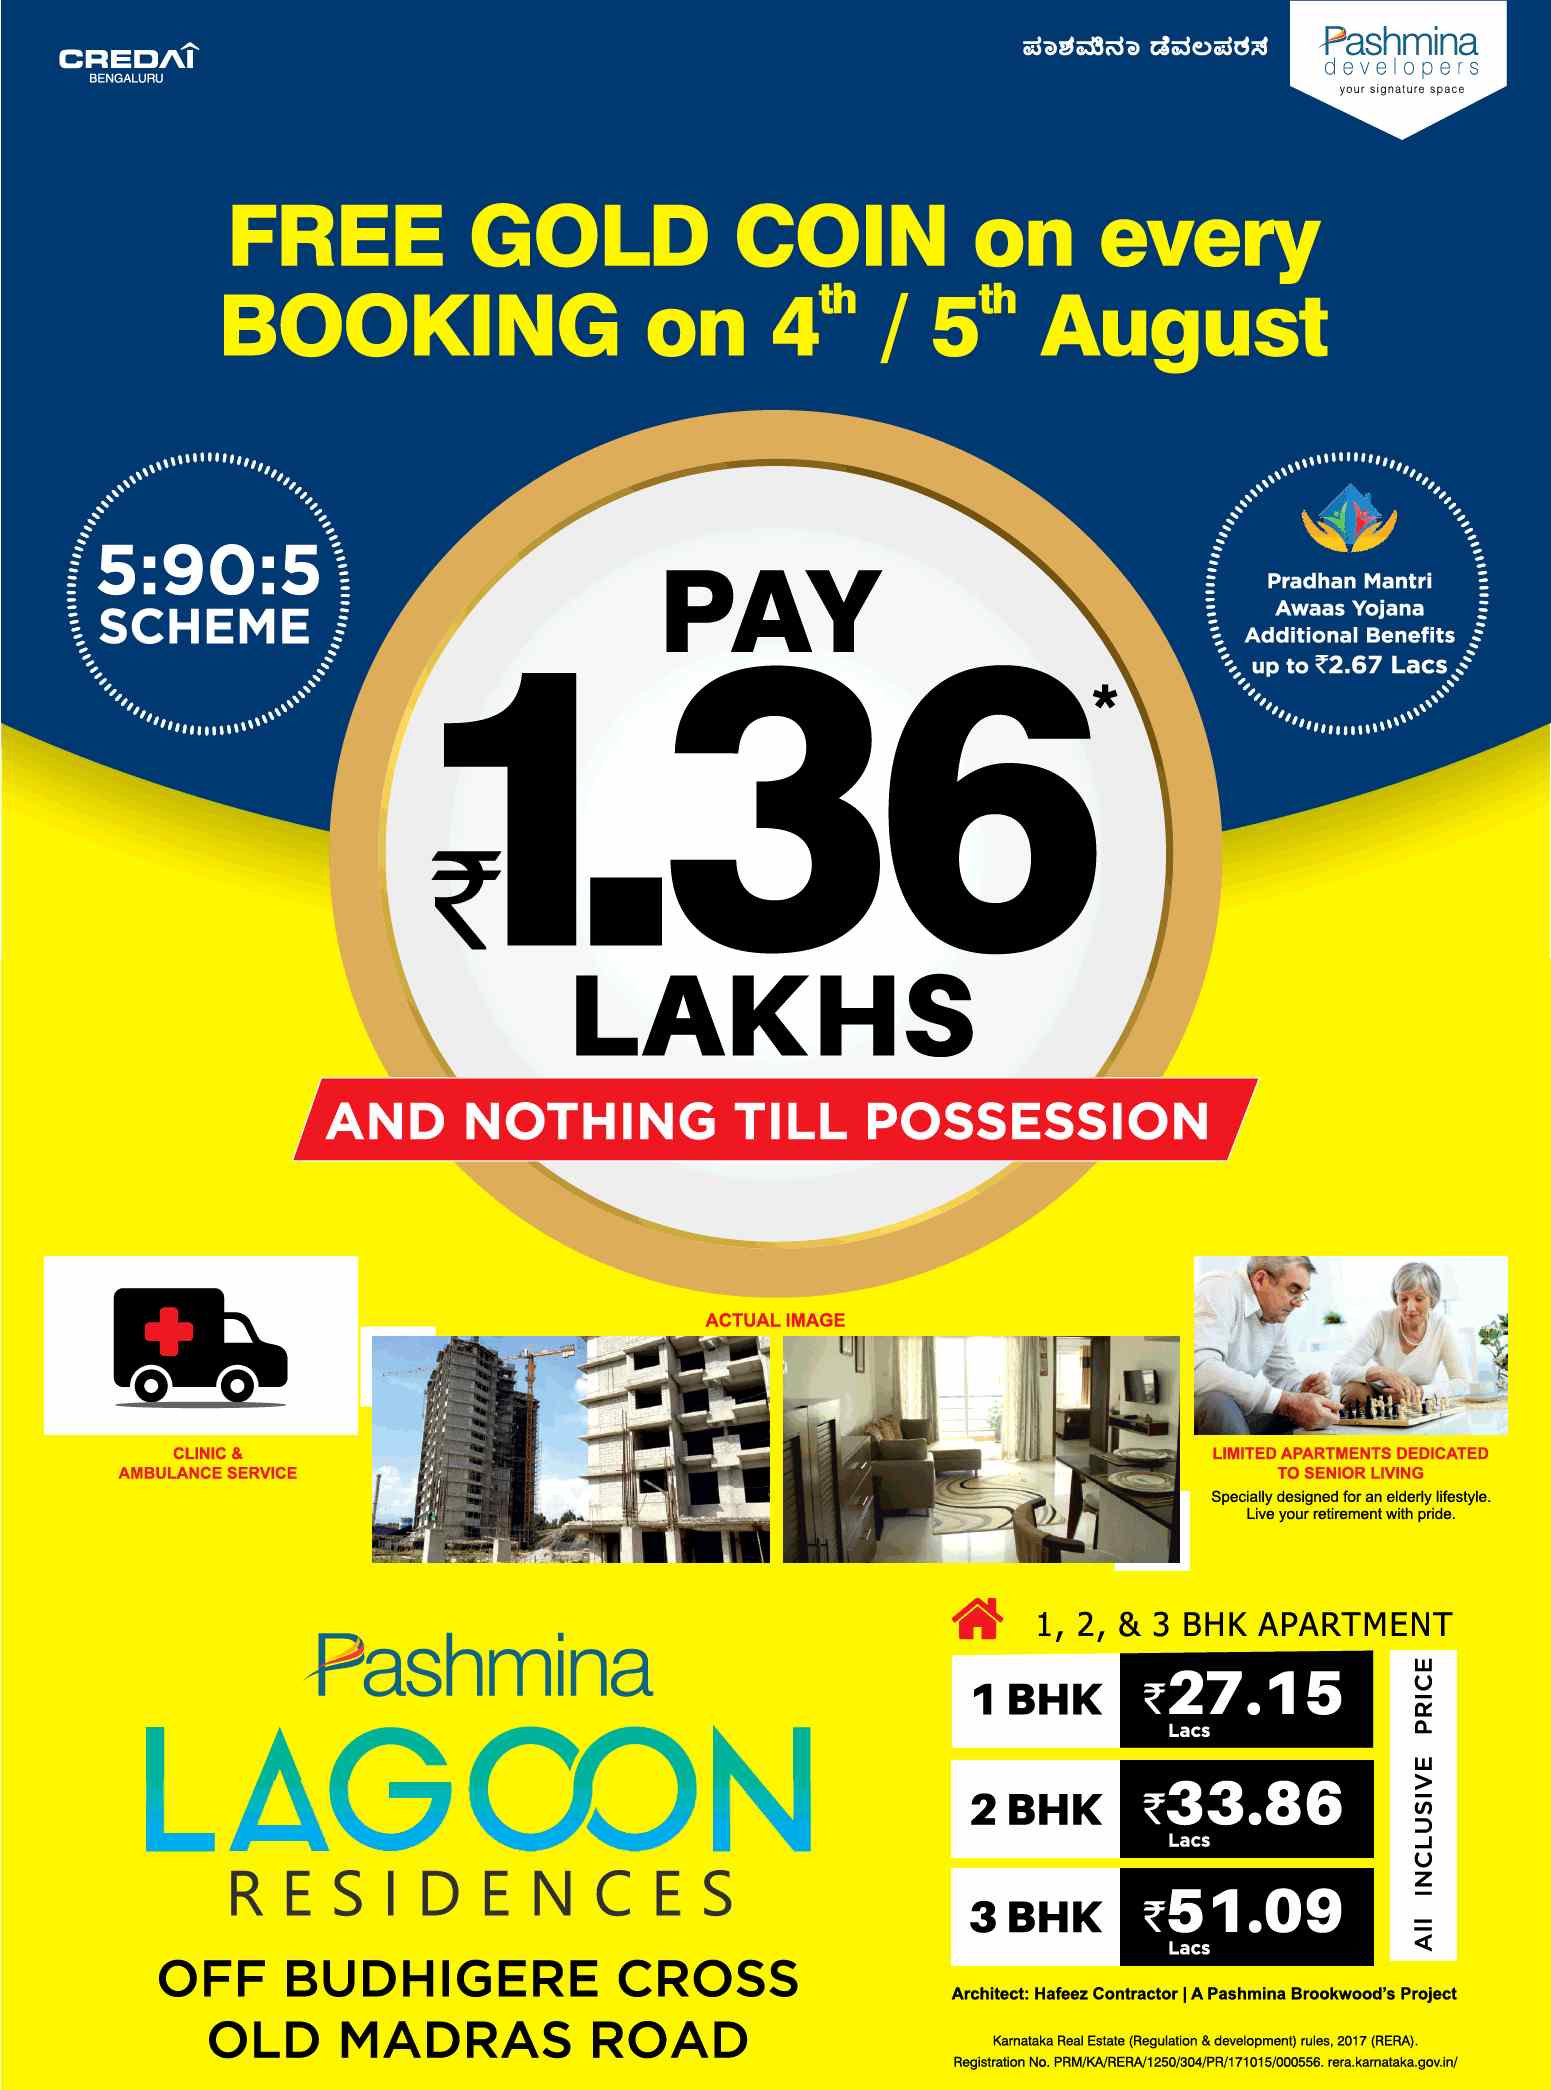 Avail additional benefits up to Rs. 2.67 Lakhs with PMAY Scheme at Lagoon Residences in Bangalore Update